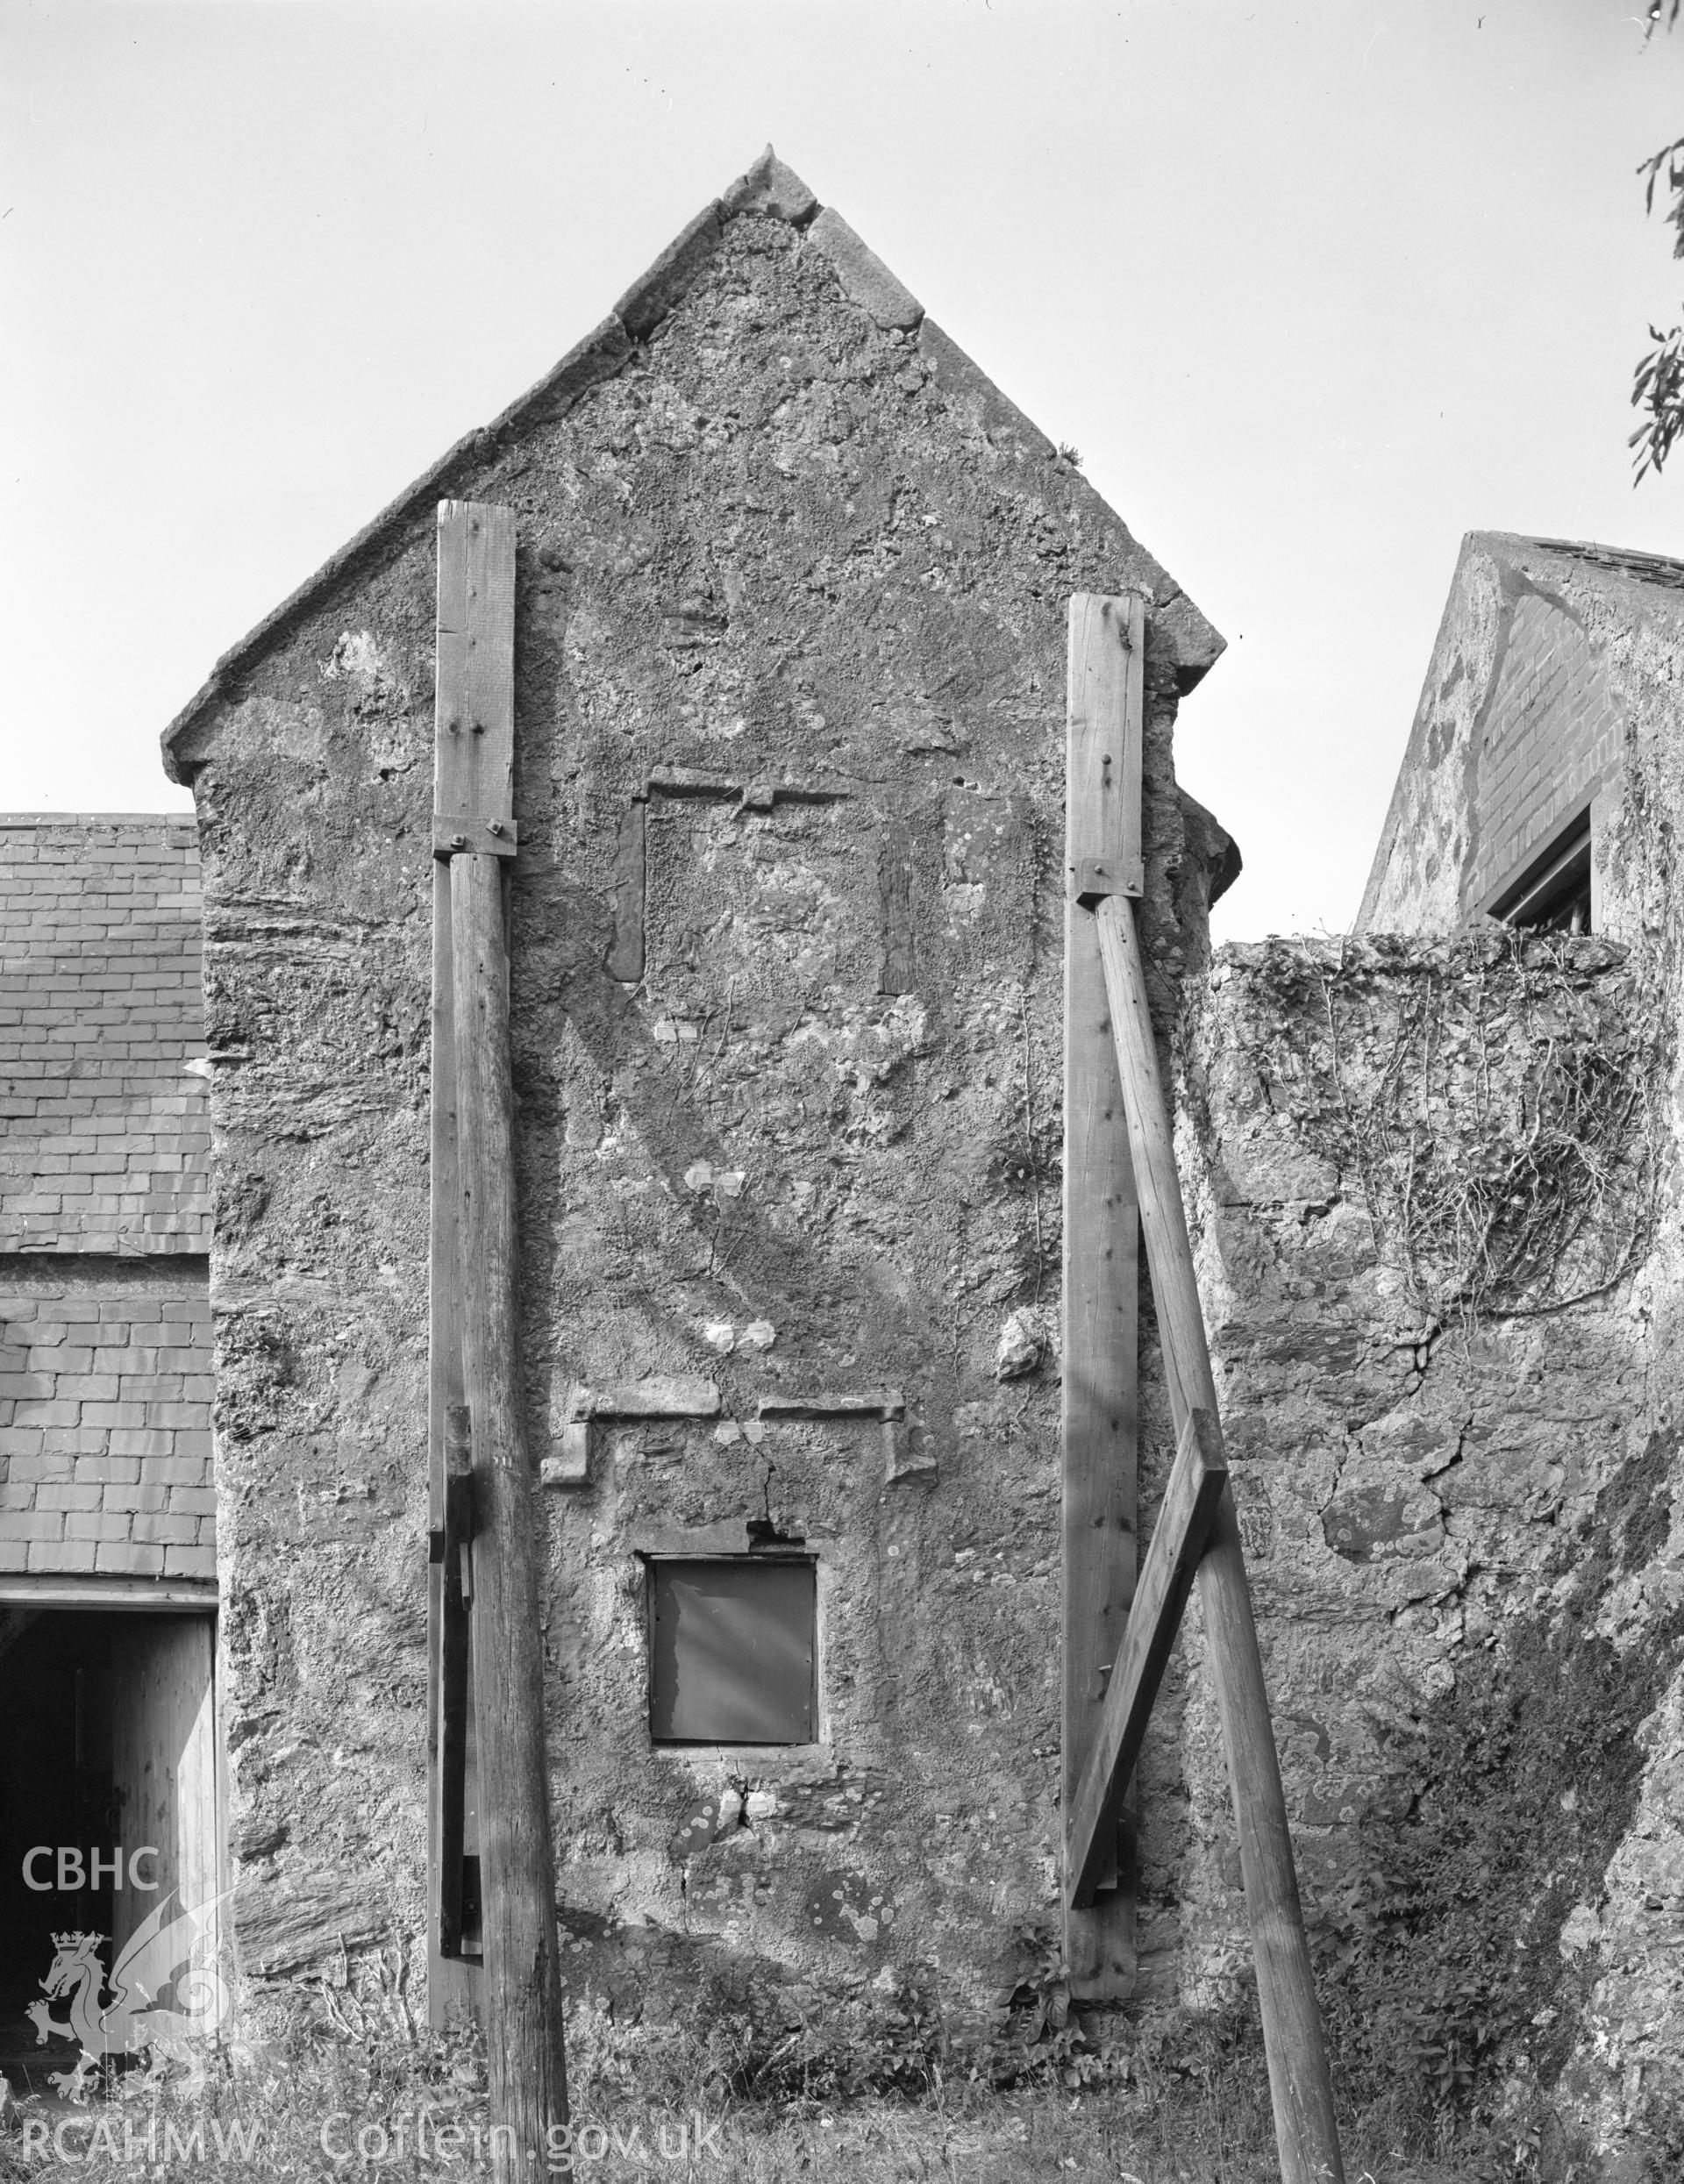 Digital copy of a black and white negative showing a view of Hafoty Hall House taken 1976.